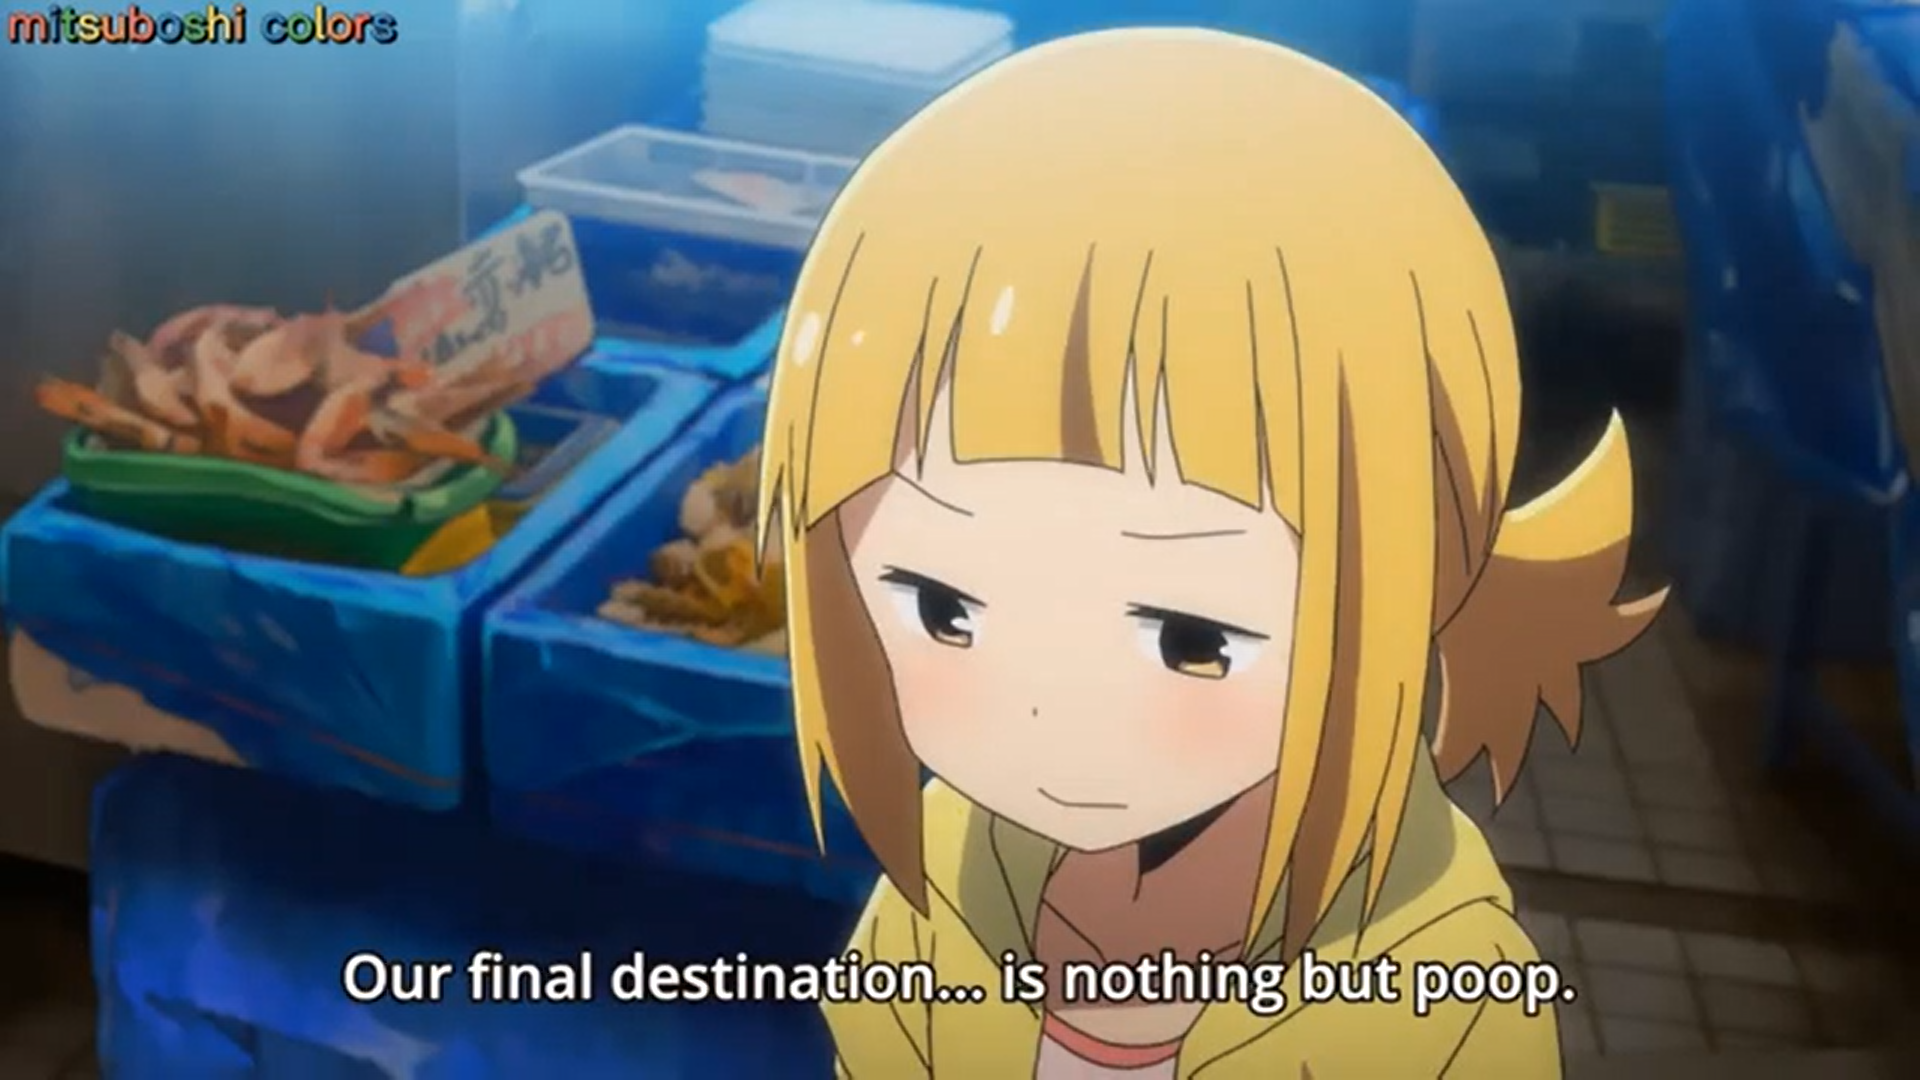 Saki from Mitsuboshi Colors saying "Our final destination is nothing but poop"